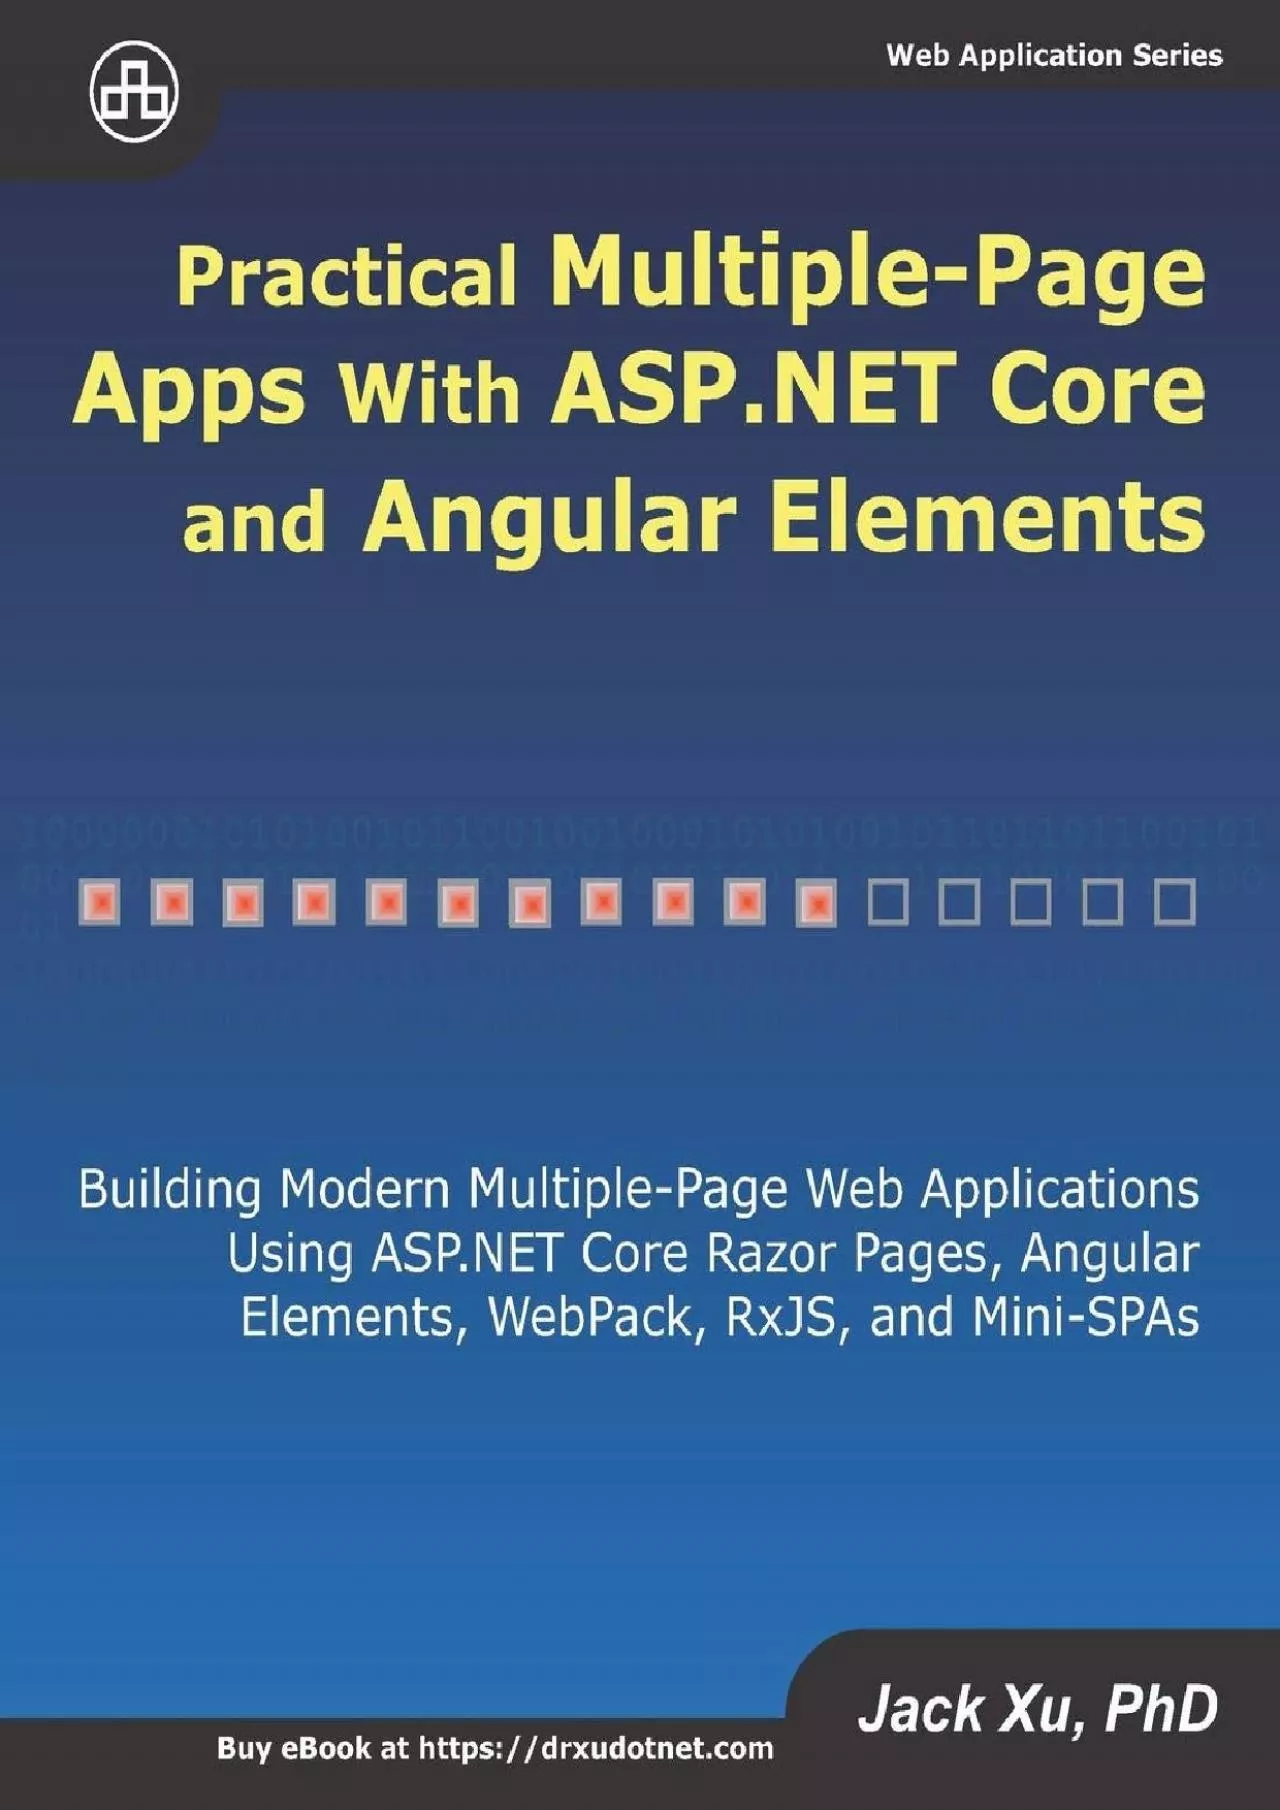 [BEST]-Practical Multiple-Page Apps with ASP.NET Core and Angular Elements: Building Modern